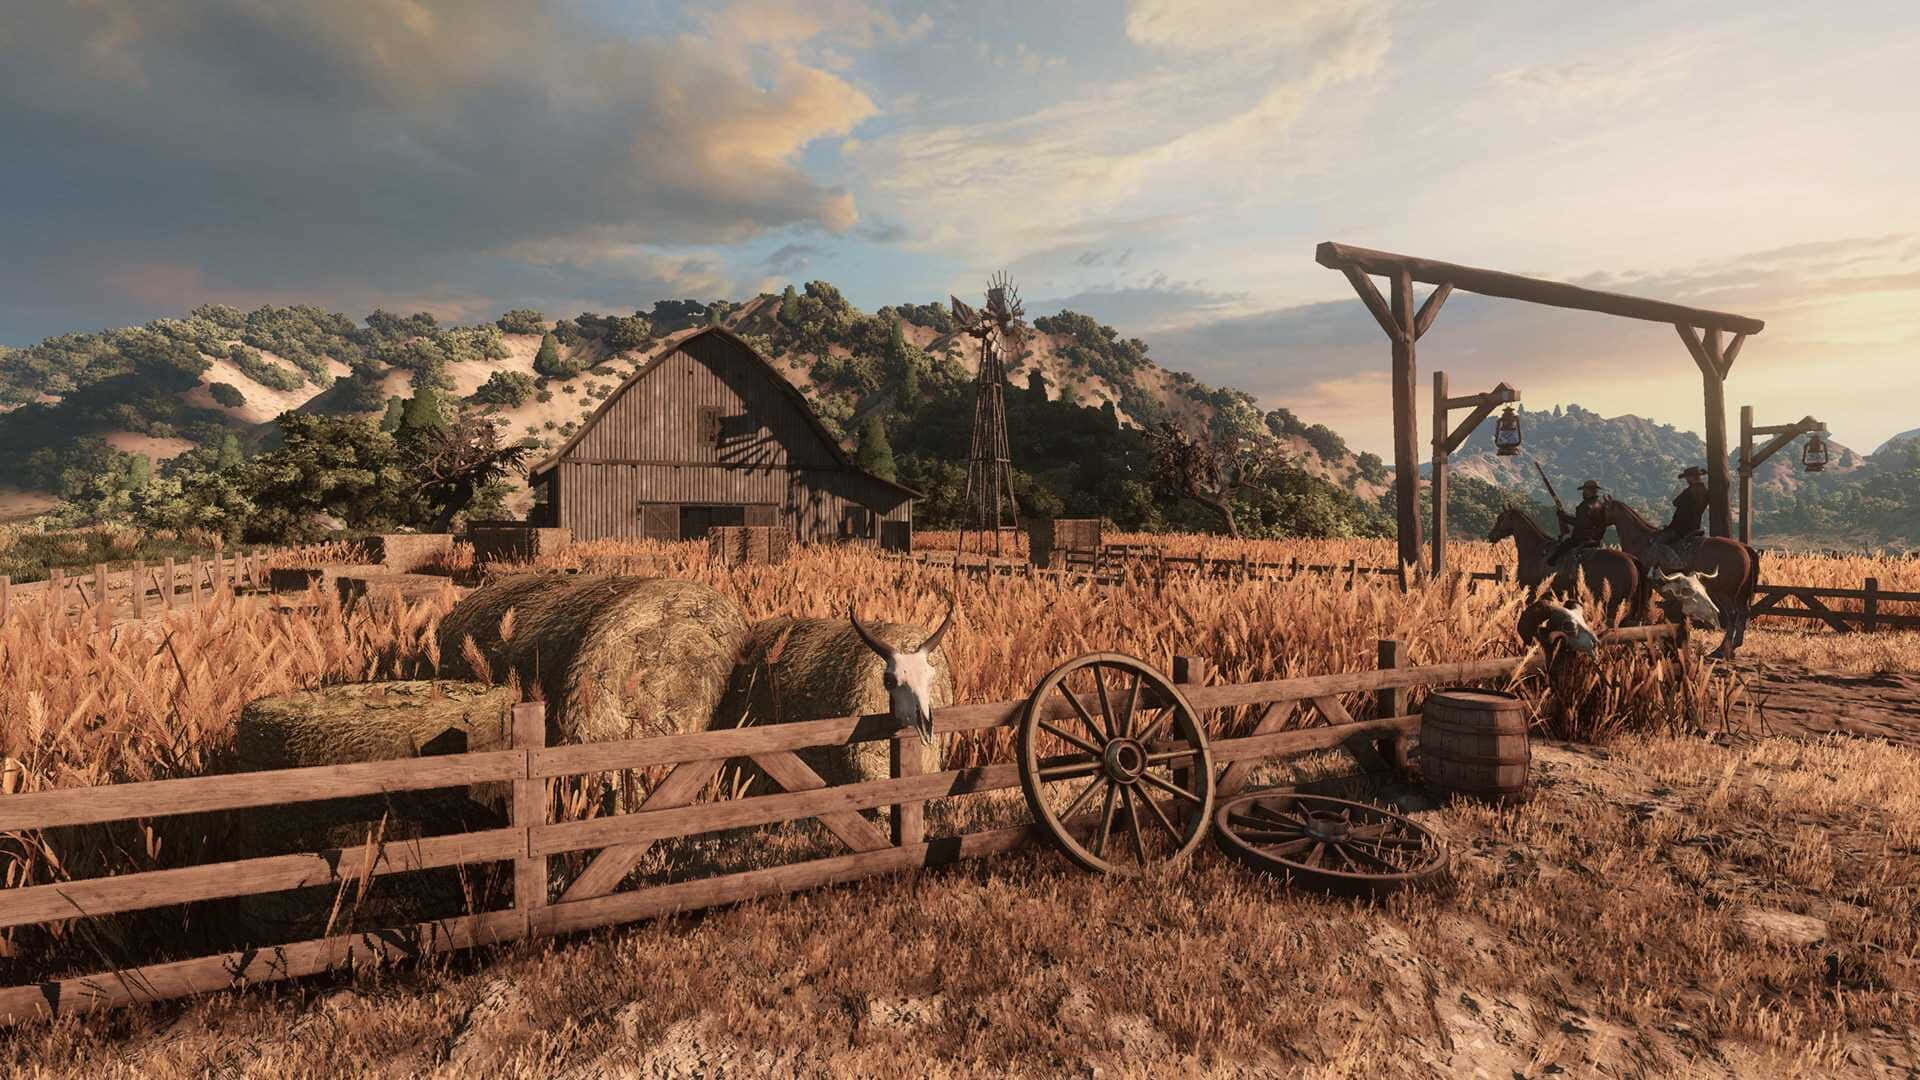 Enjoy the scenic views of a picturesque ranch Wallpaper